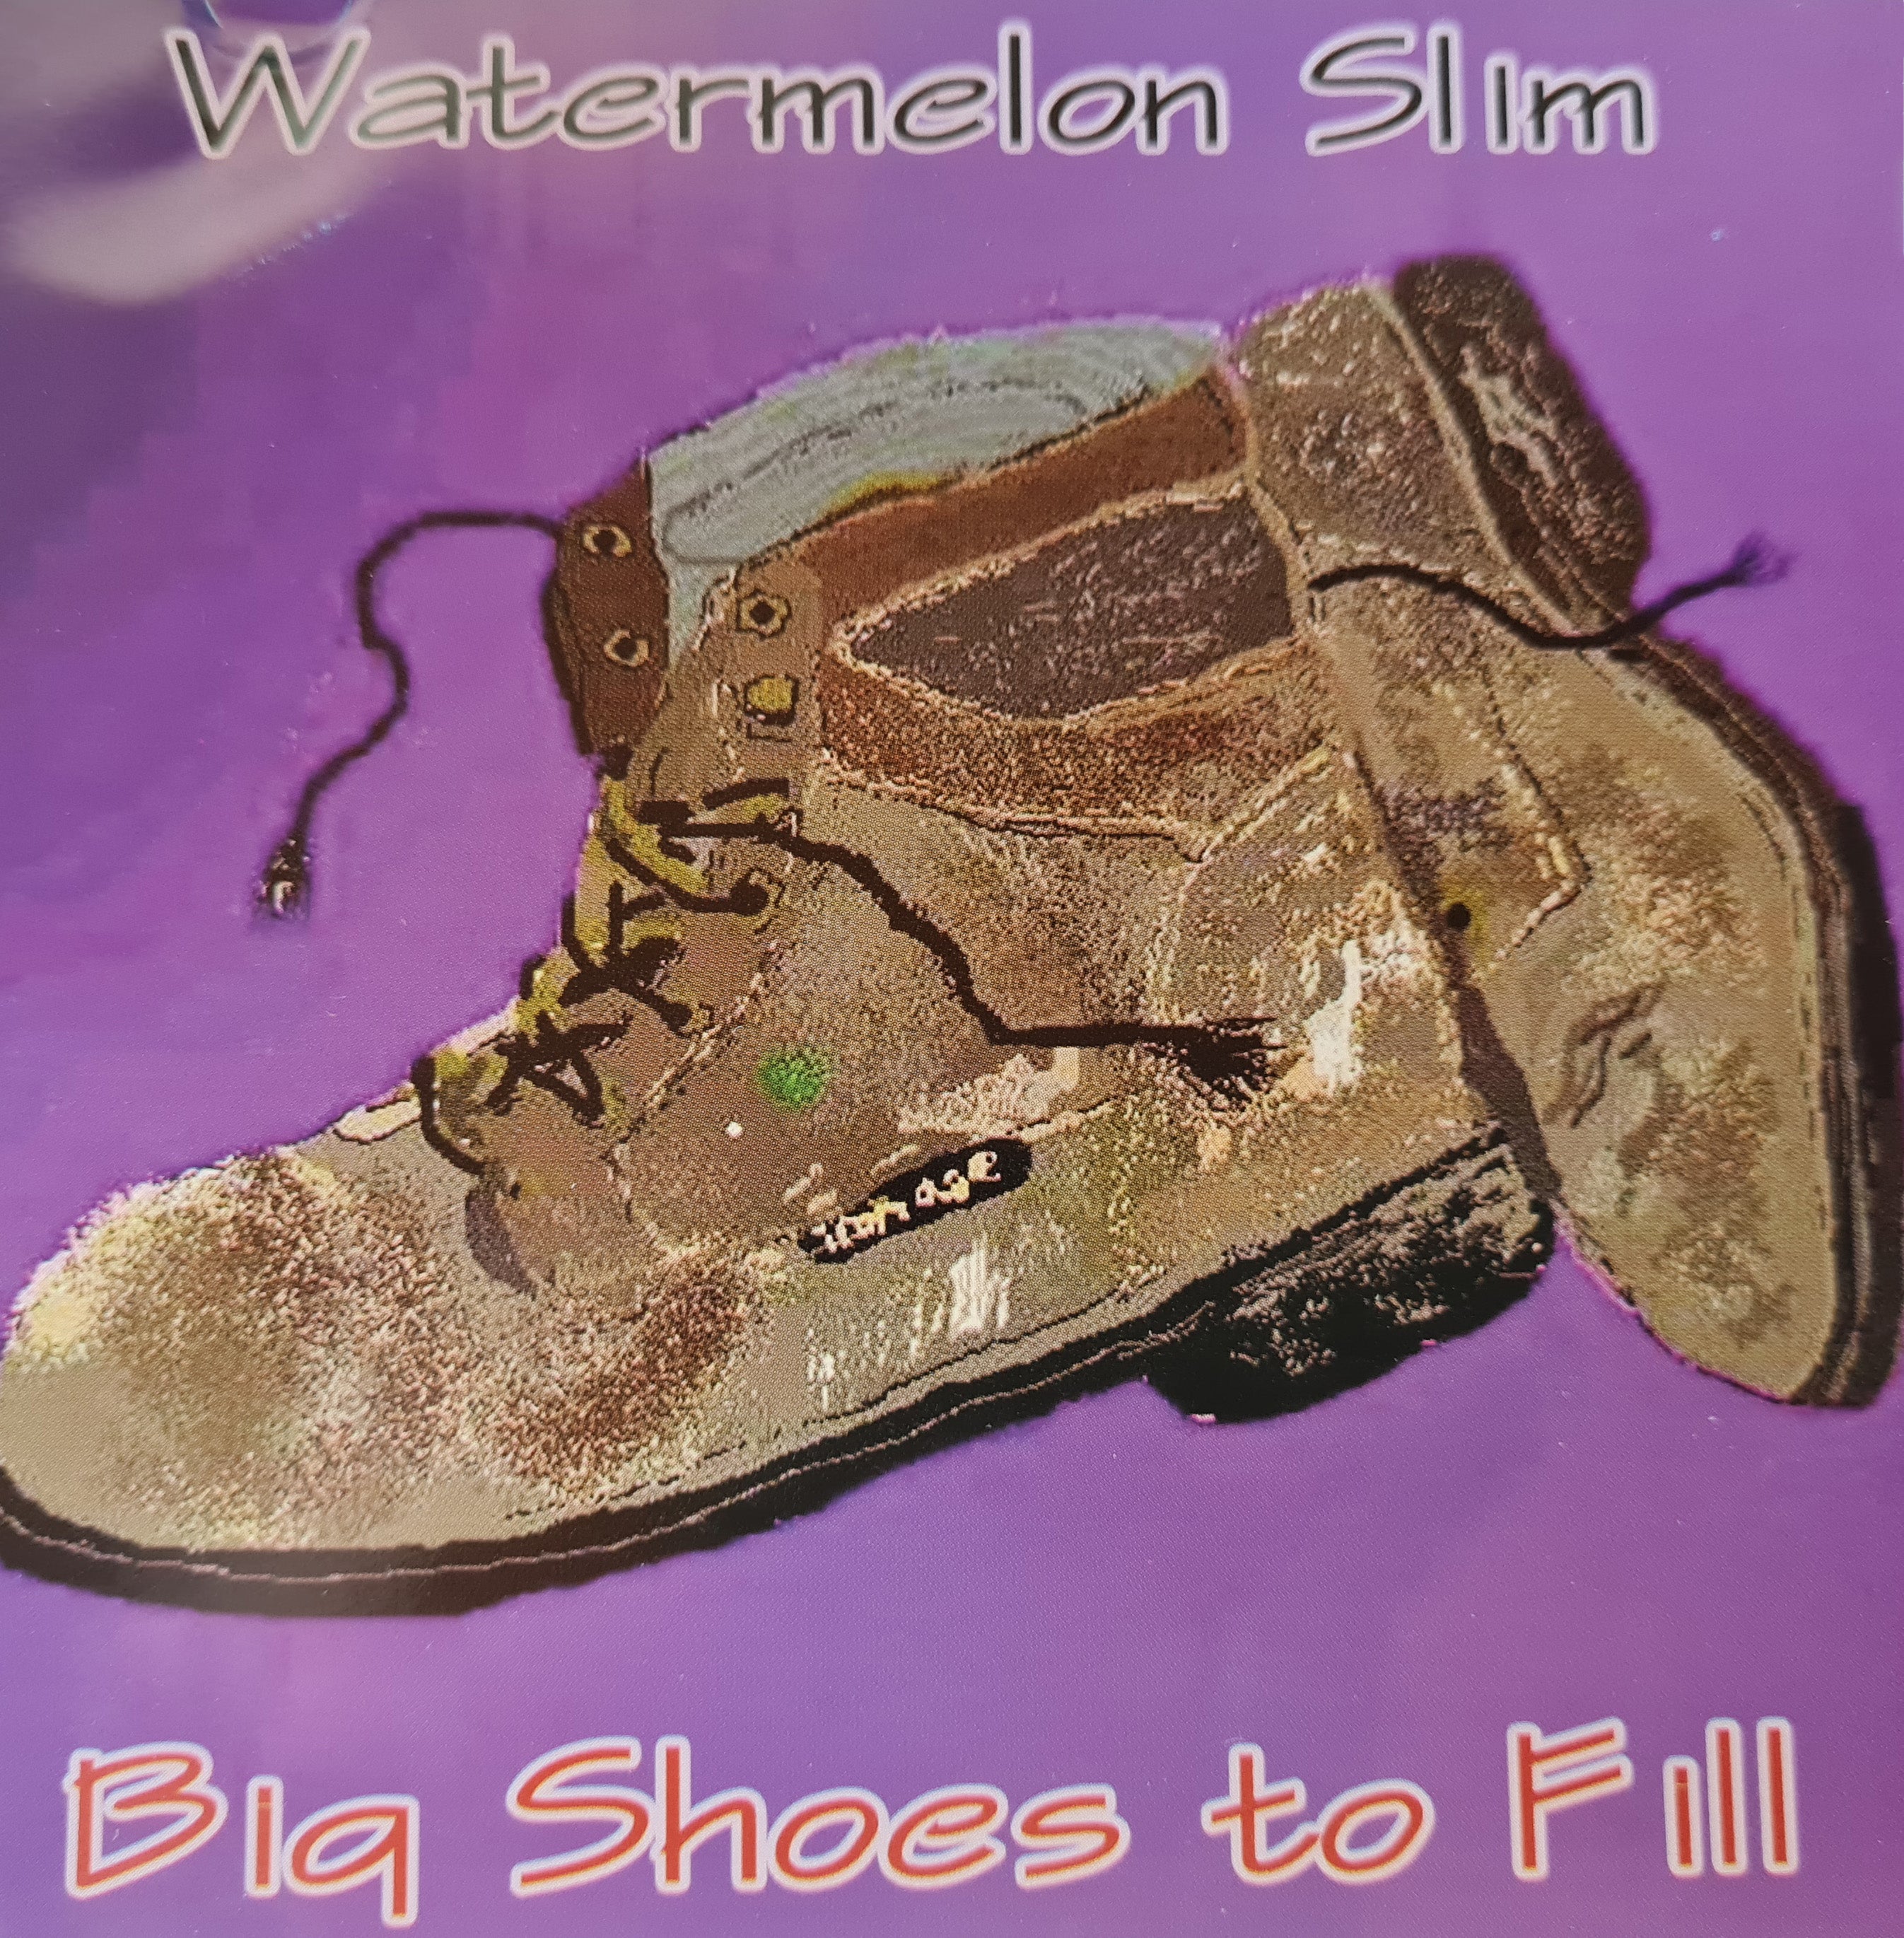 Watermelon Slim - Big Shoes to Fill (CD)